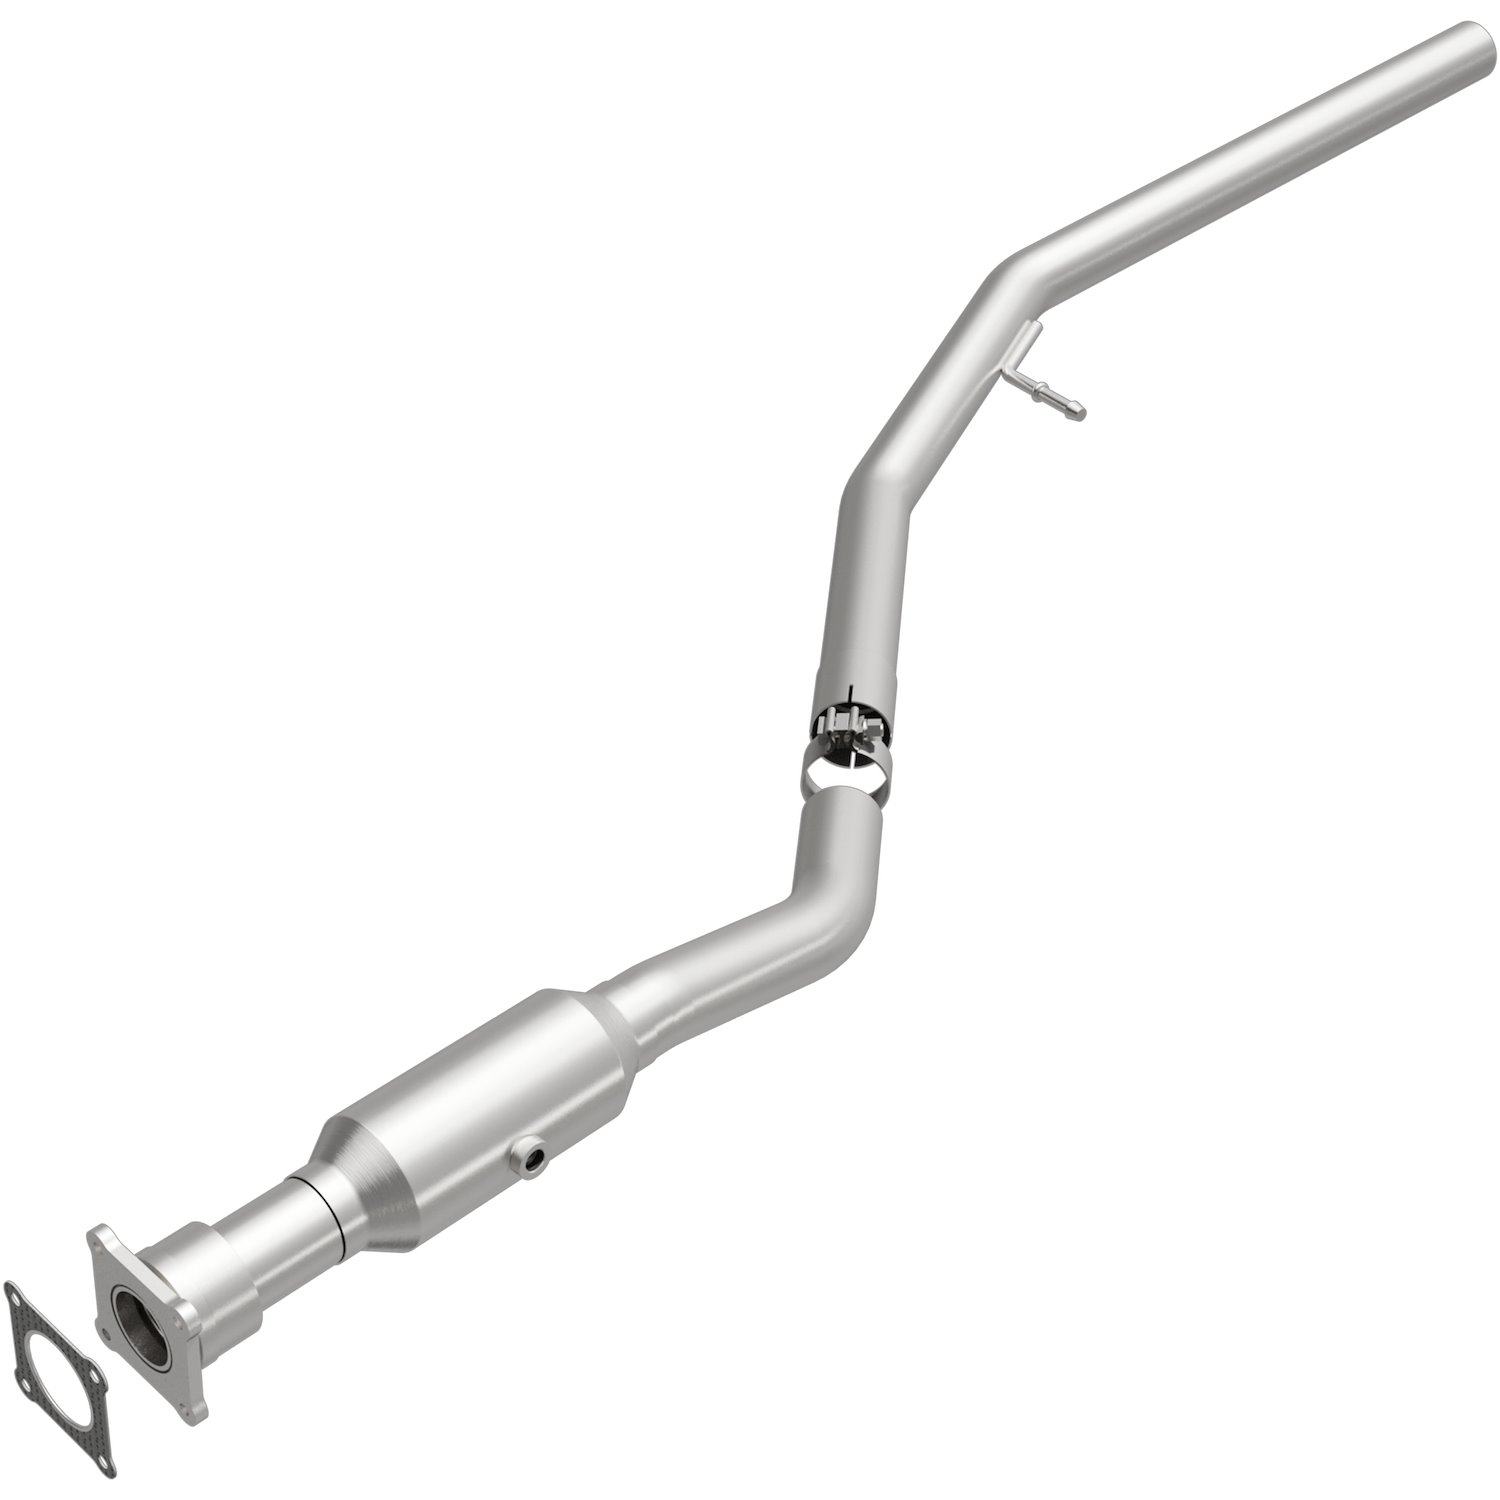 OEM Grade Federal / EPA Compliant Direct-Fit Catalytic Converter 49948